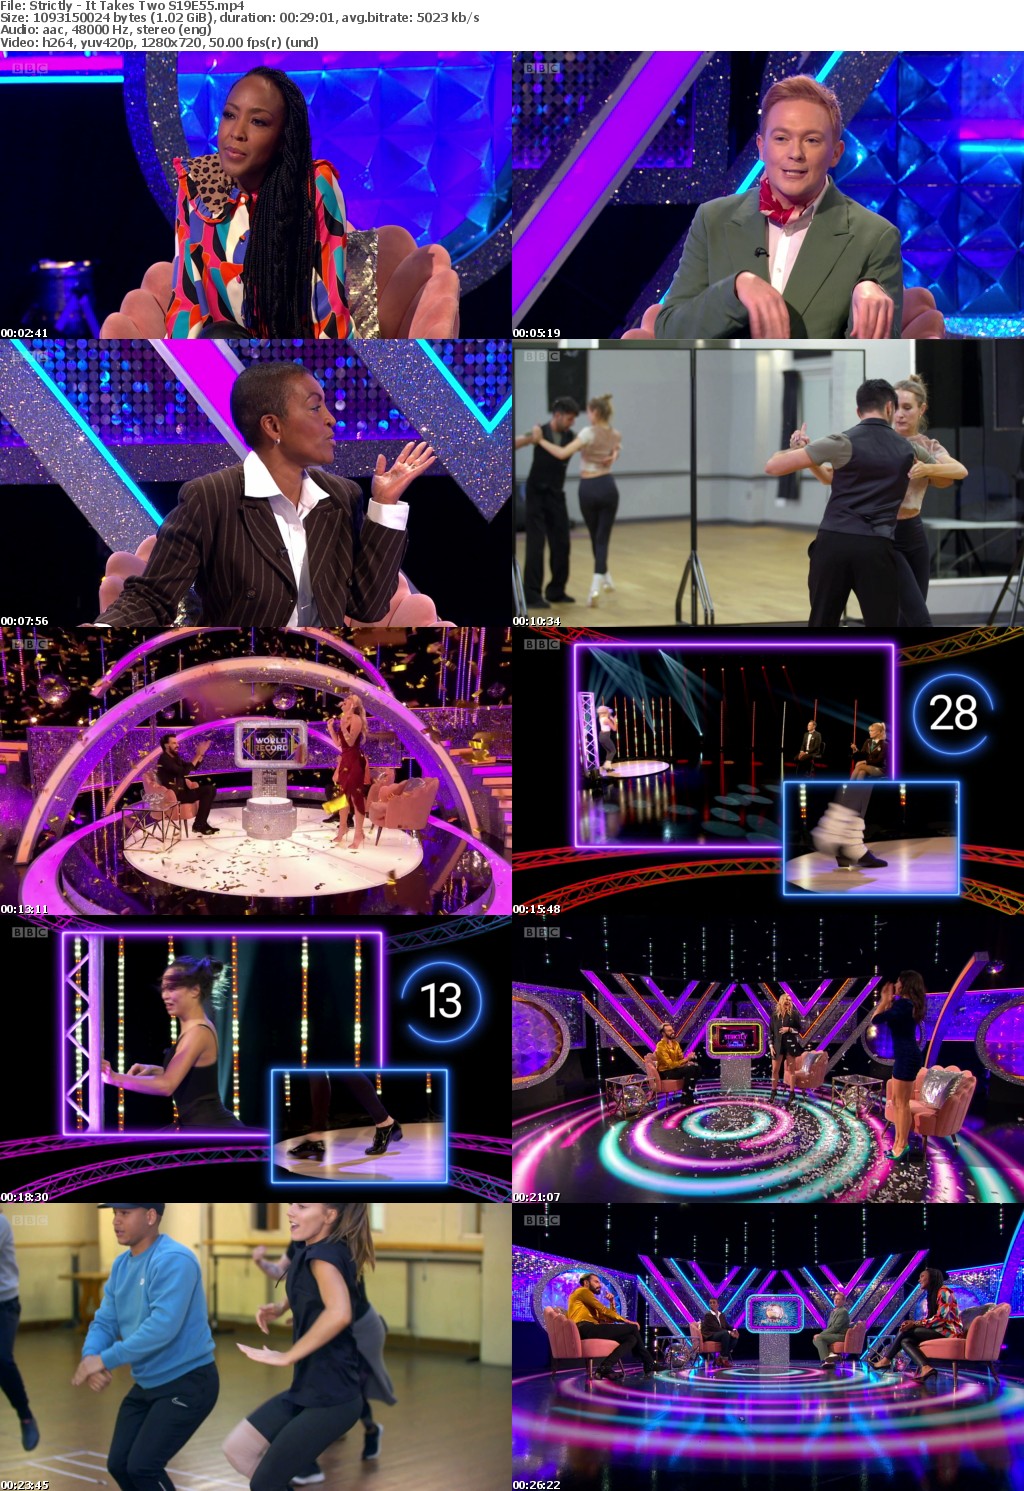 Strictly - It Takes Two S19E55 (1280x720p HD, 50fps, soft Eng subs)